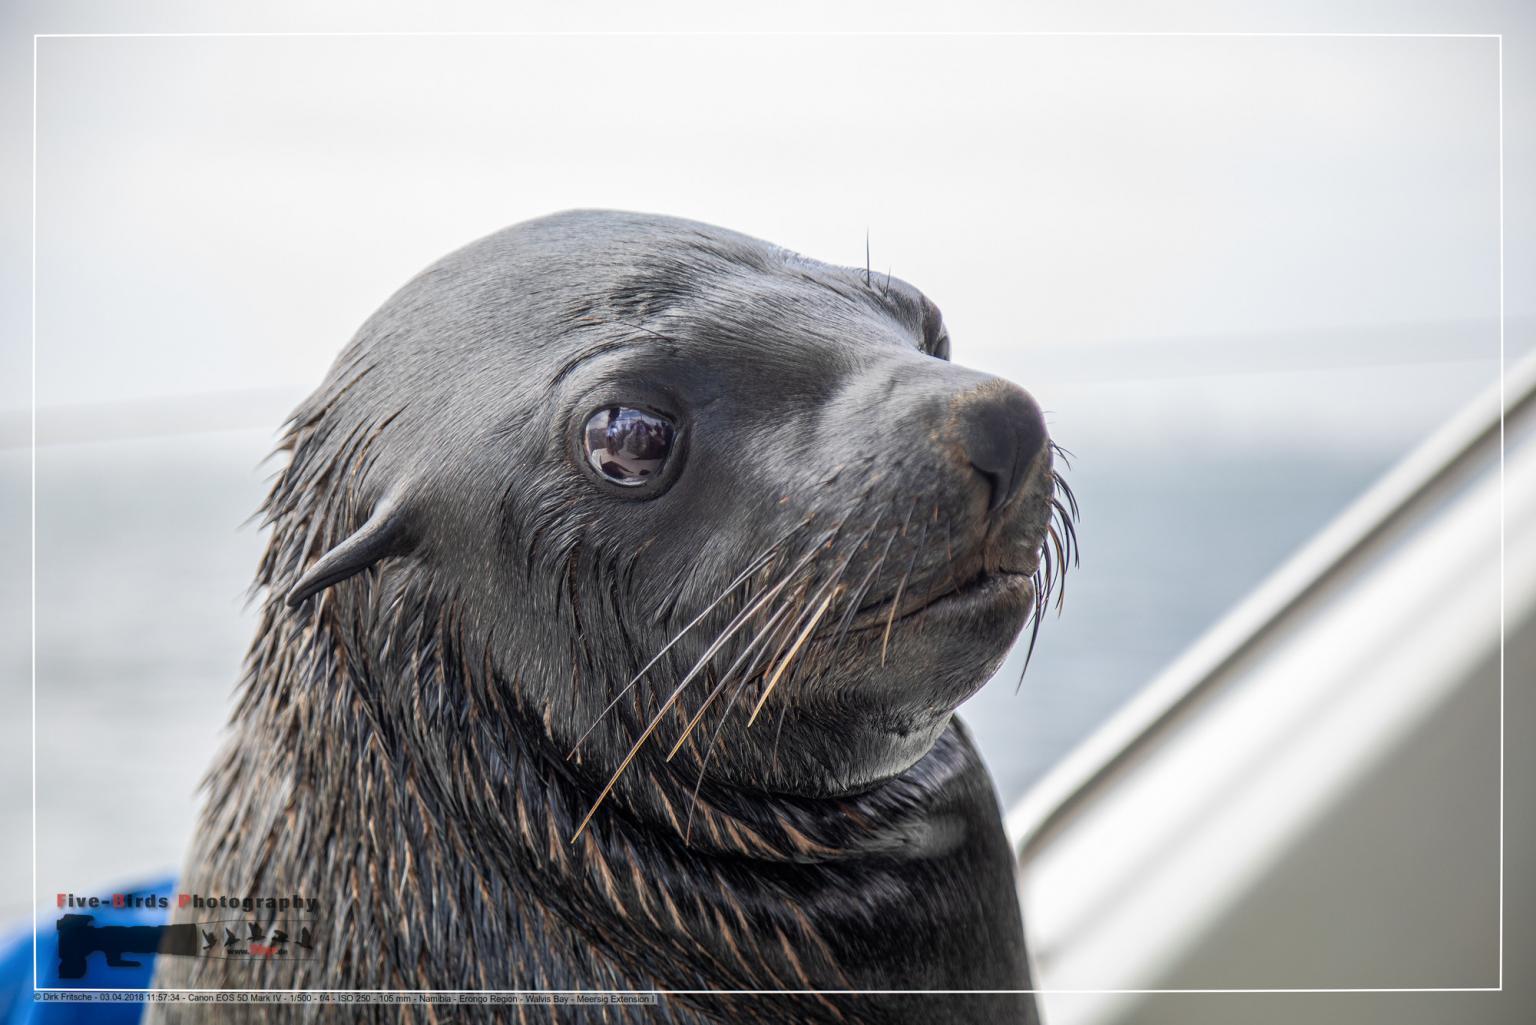 A Cape Fur Seals on a boat at the Atlantic Ocean near Walfis Bay in western Namibia